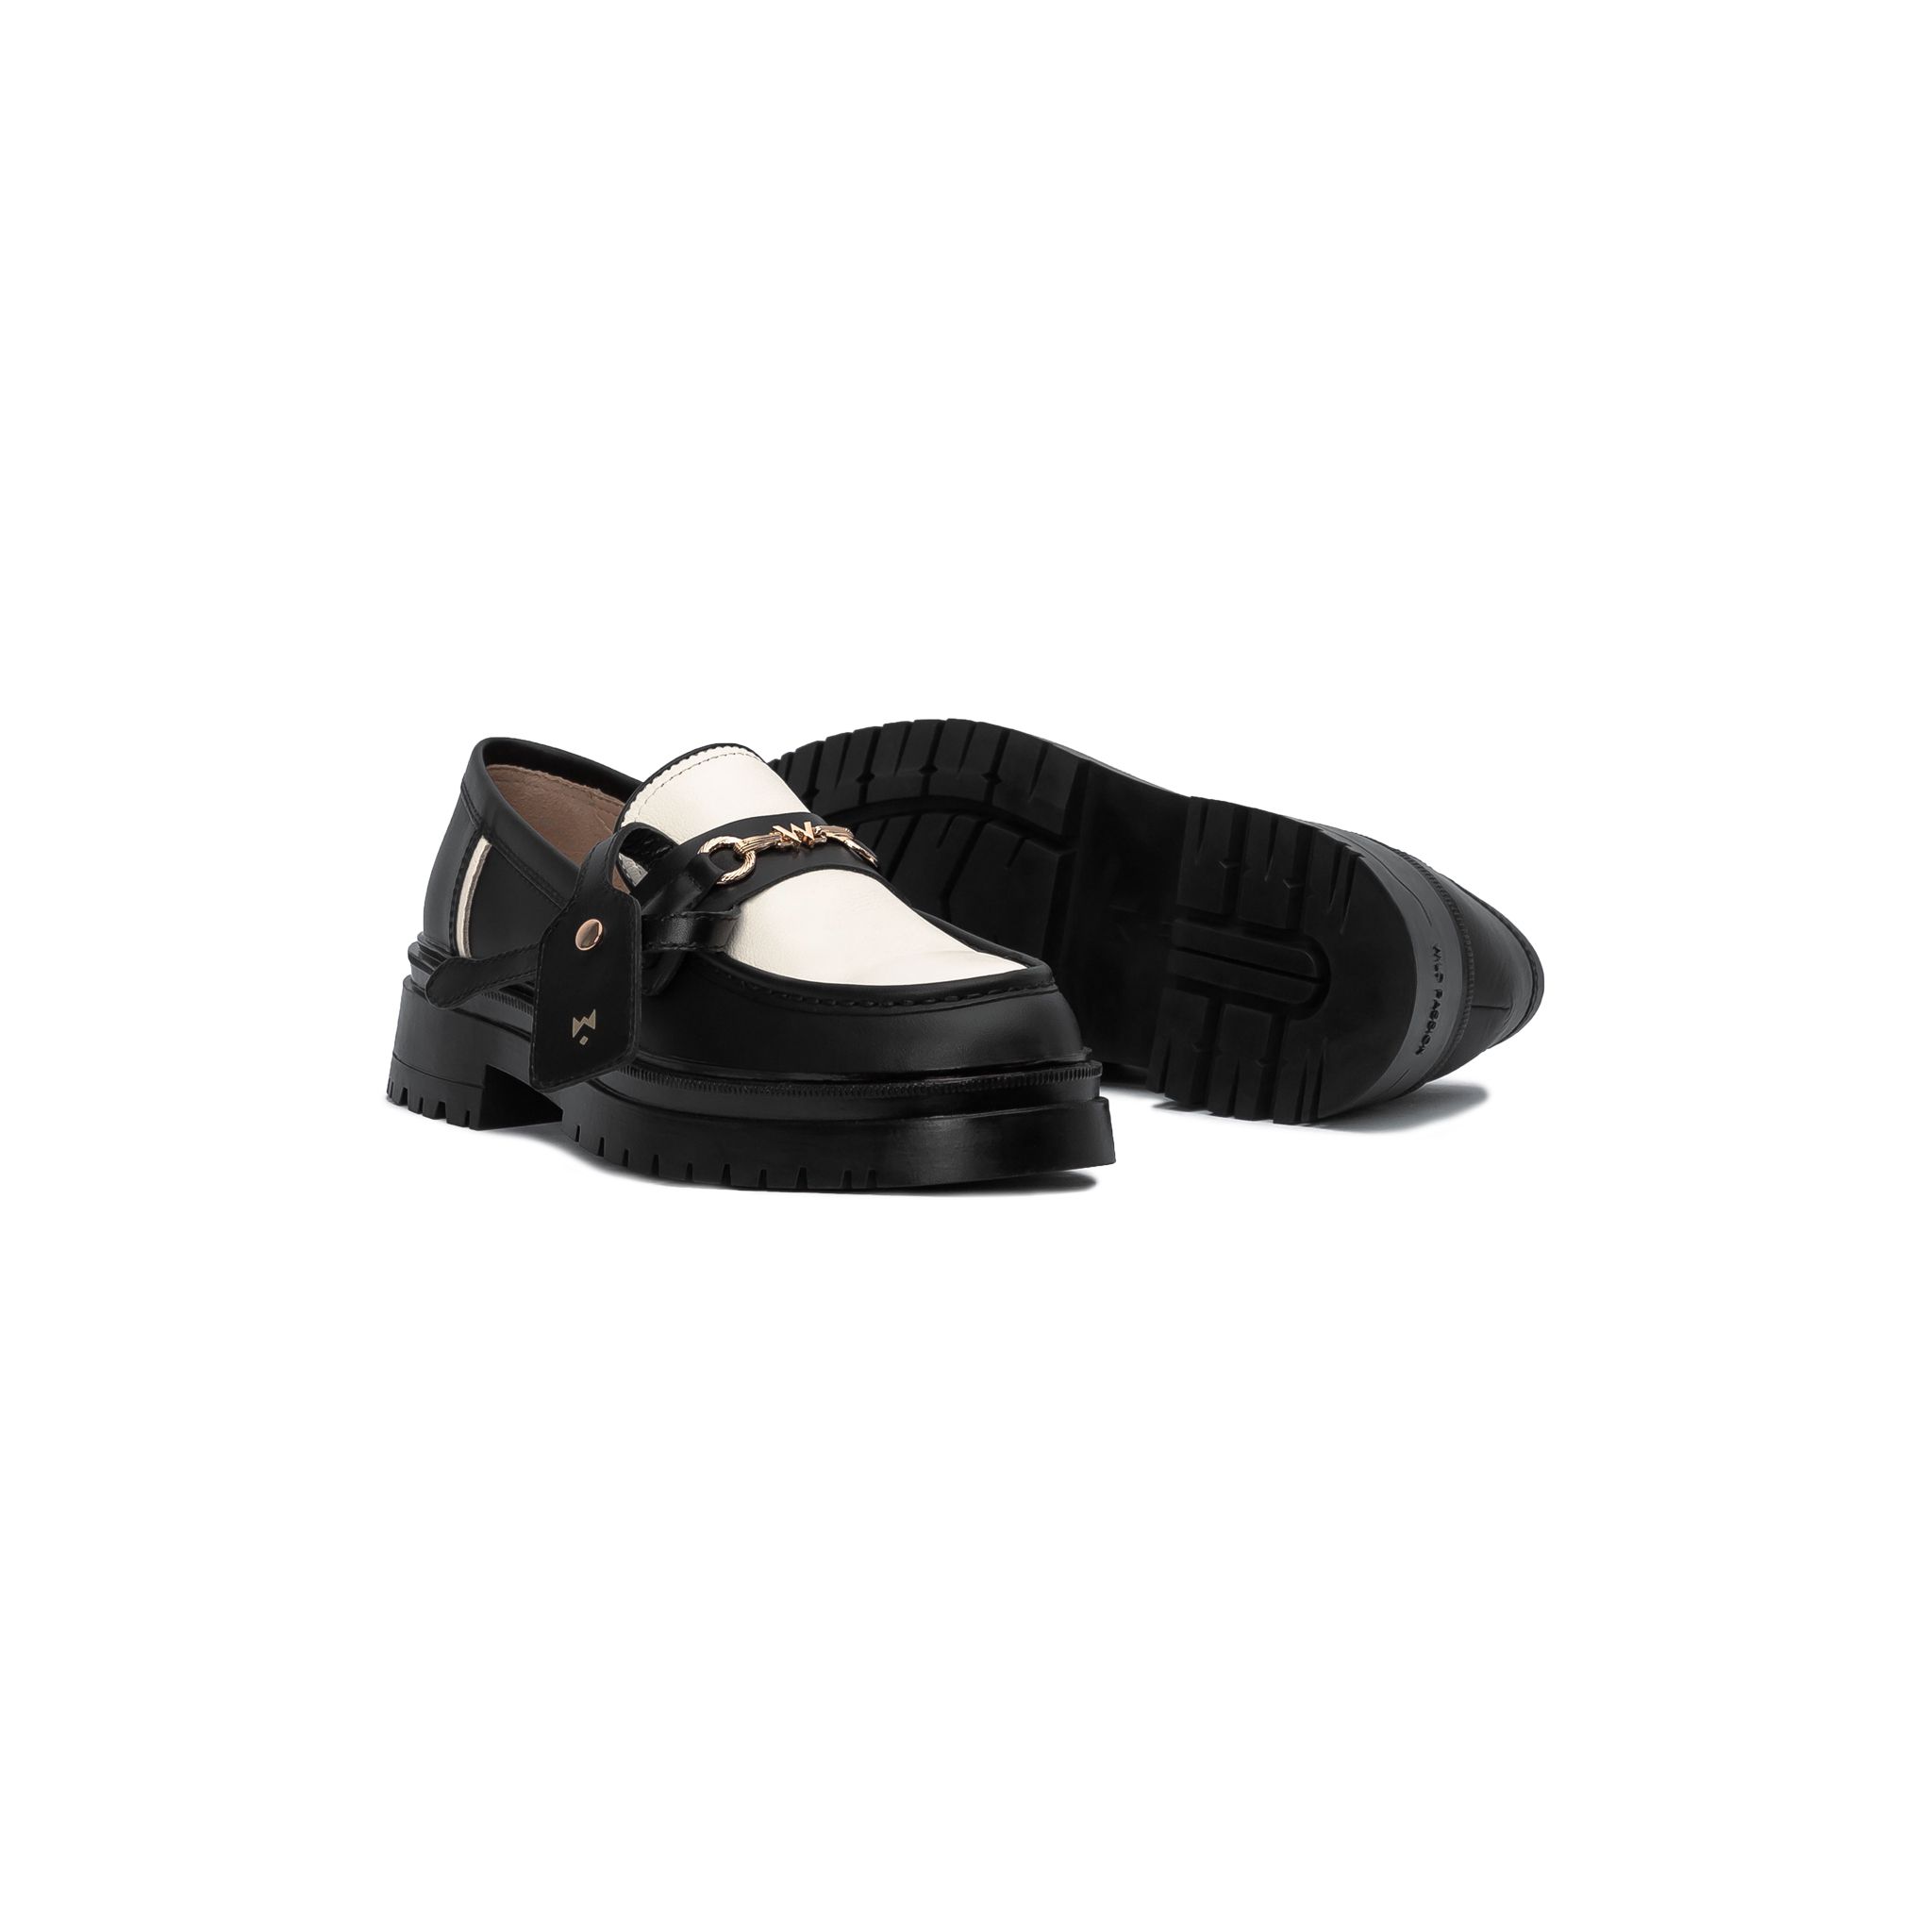  THE SEAN LADY WOLF CHUNKY LOAFER - BLACK OFF WHITE 